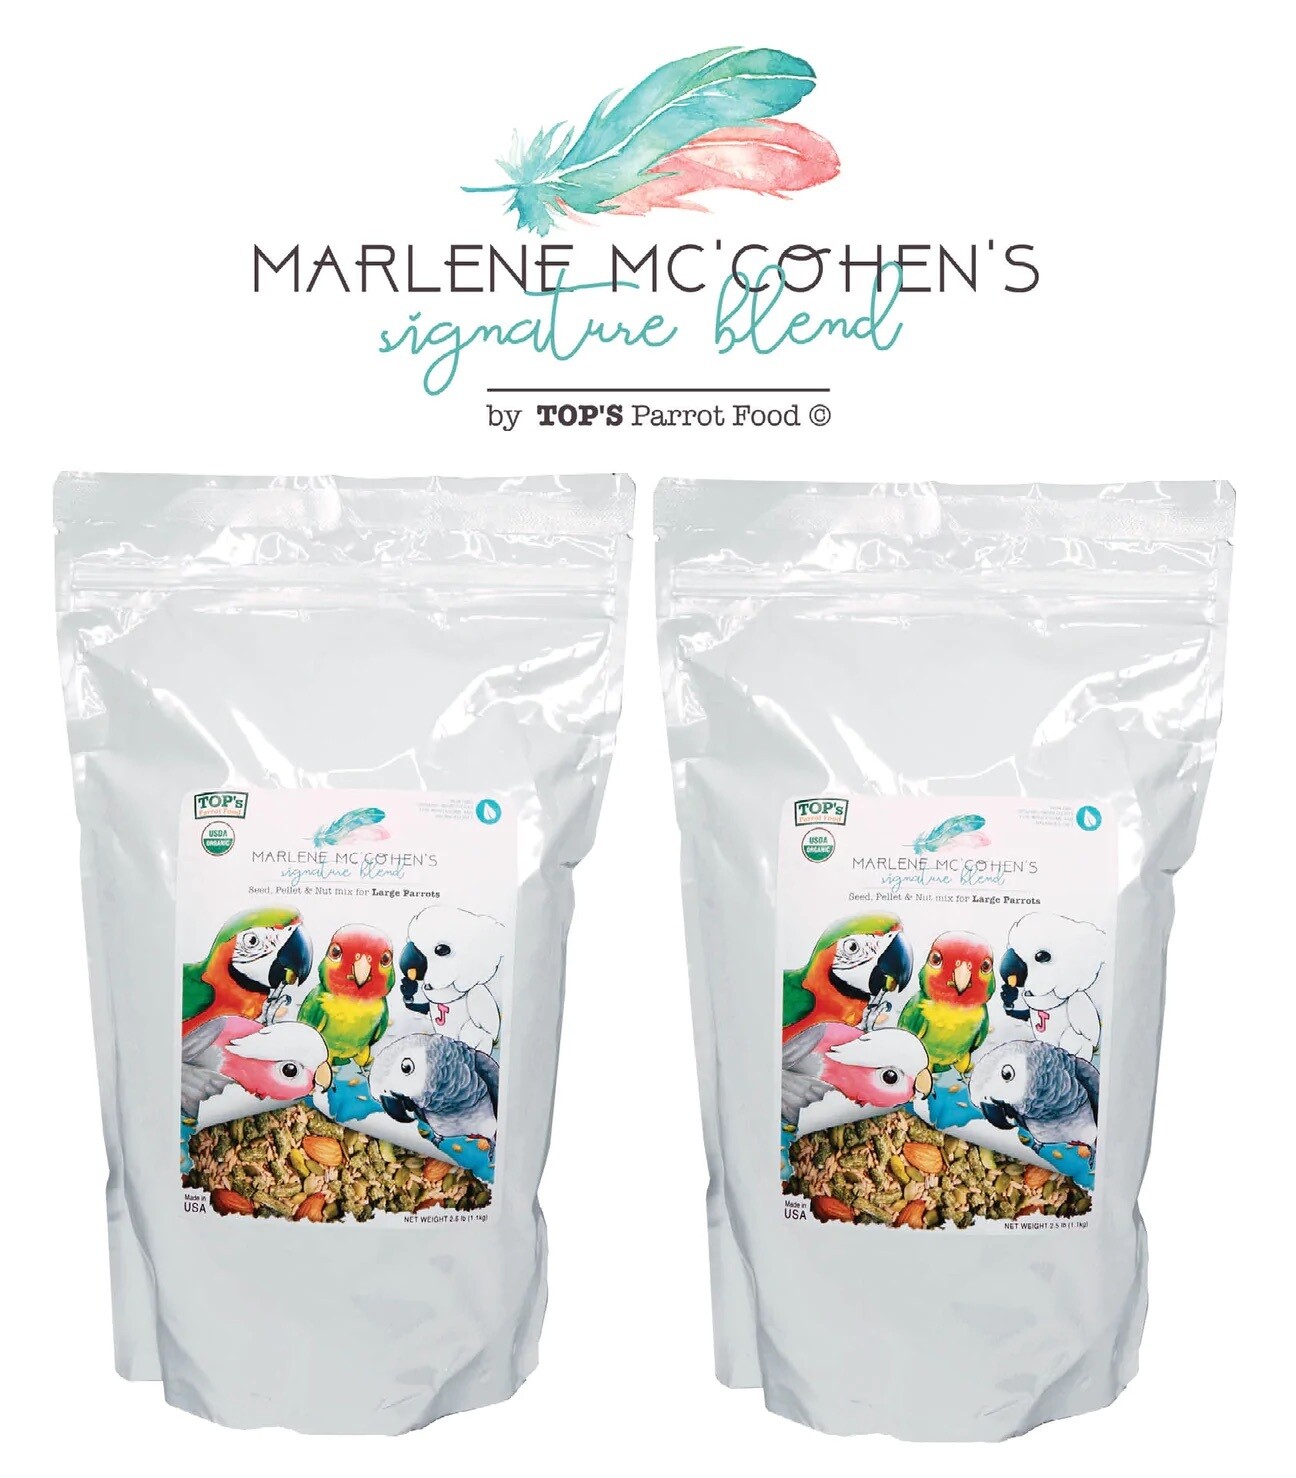 Marlene Mc'Cohen's Signature Blend by TOPs Parrot Food - Mix of TOPs pellets, seed mixes and nuts for Large Birds 2.5Lb - 1 Bag